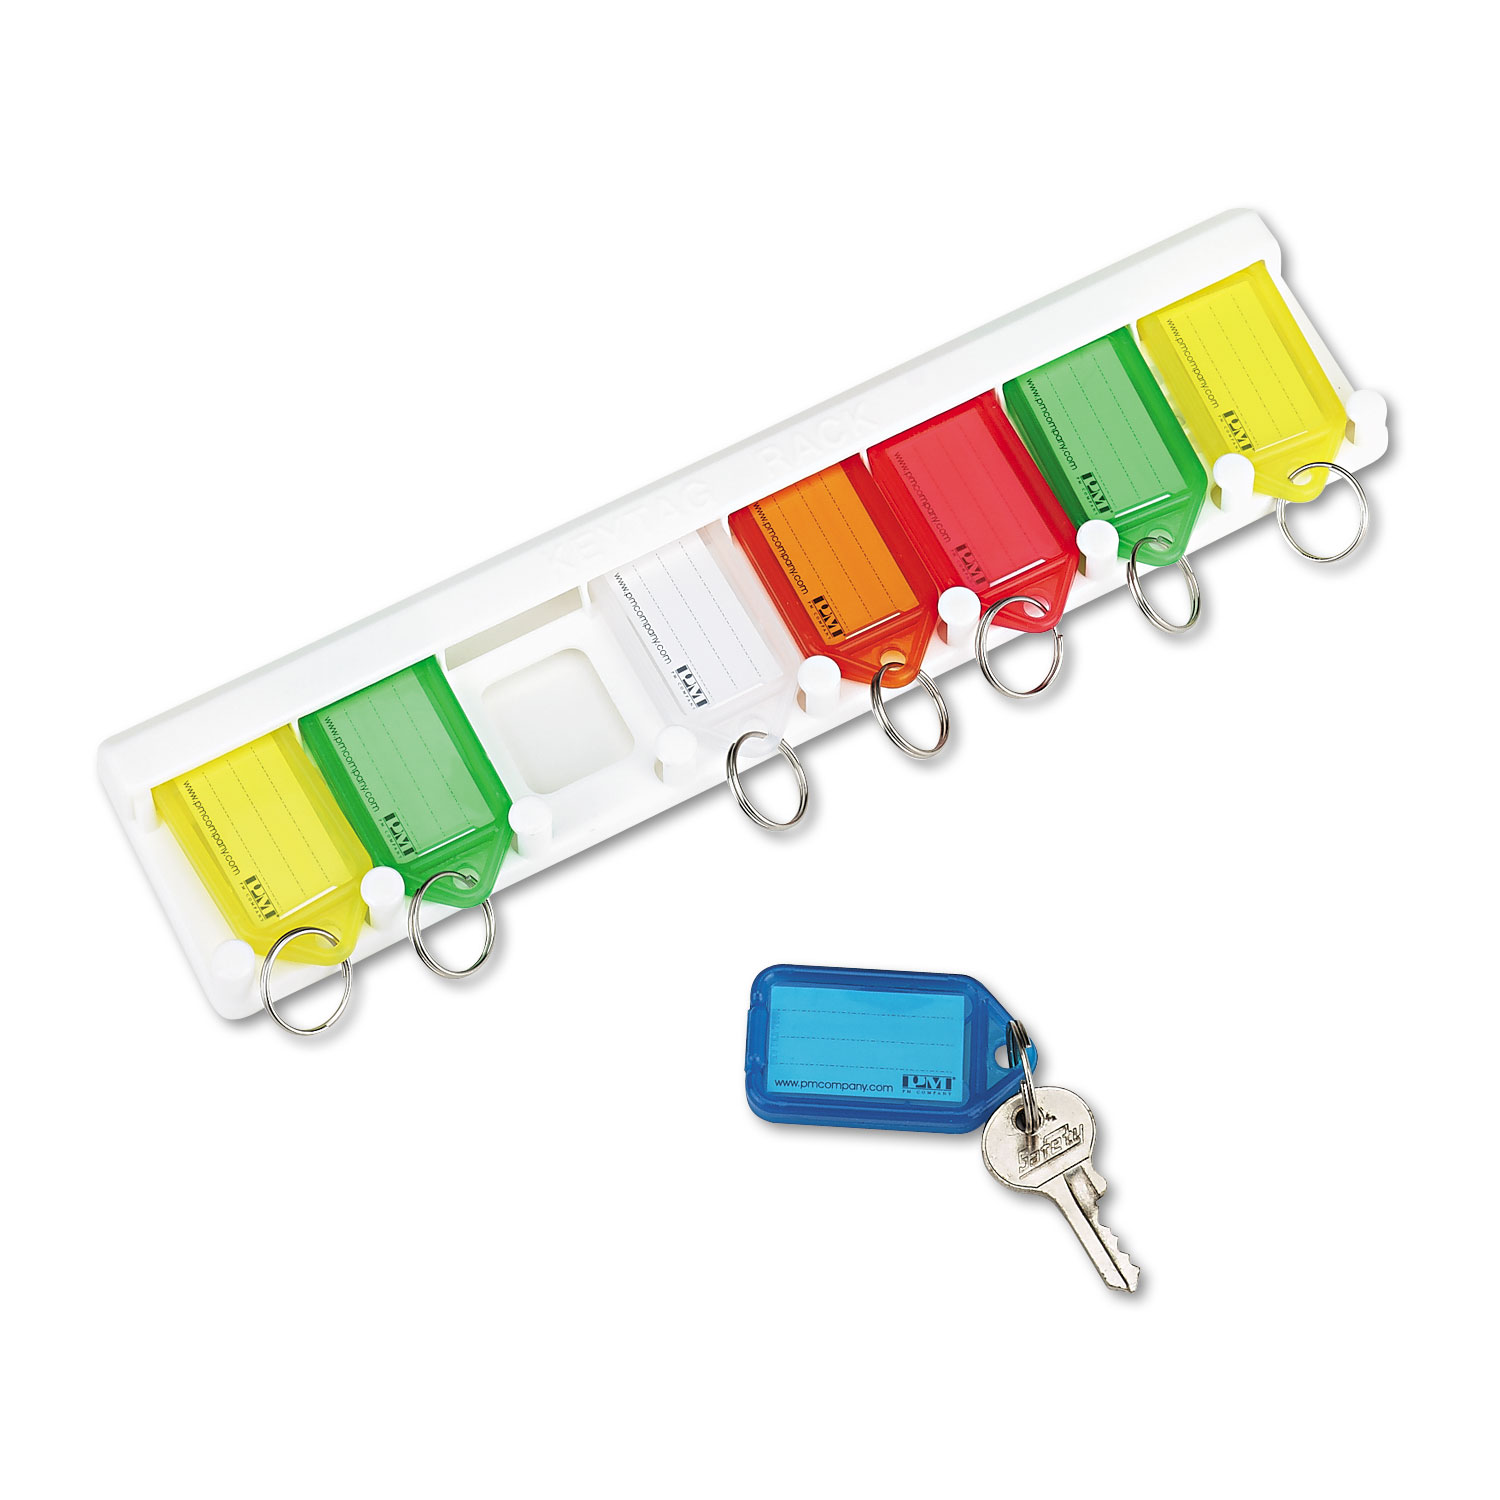  SecurIT 4991 Color-Coded Key Tag Rack, 8-Key, Plastic, White, 10 1/2 x 1/4 x 2 1/2 (ICX94190032) 